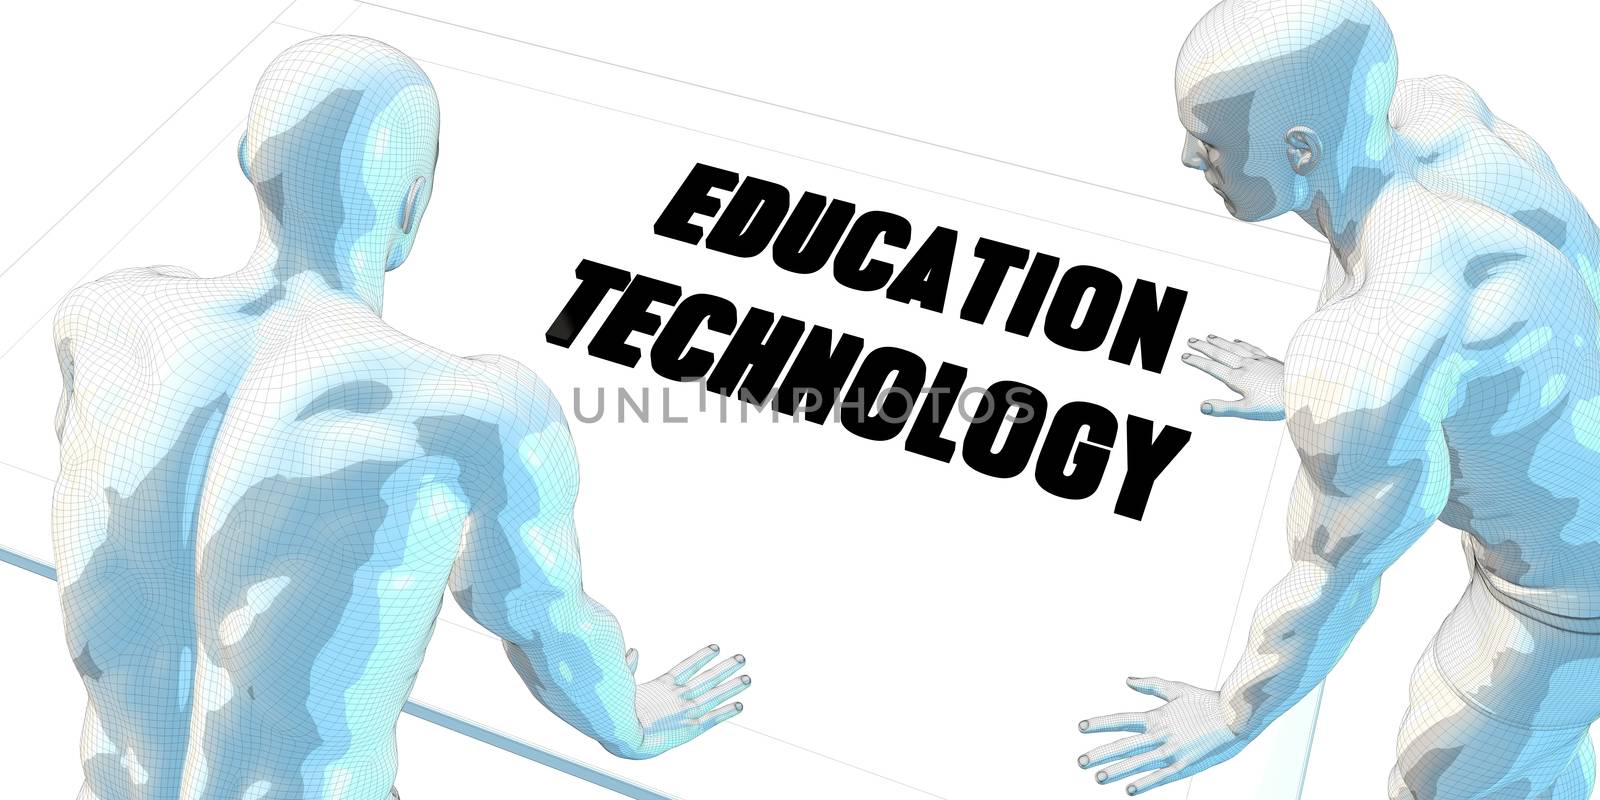 Education Technology Discussion and Business Meeting Concept Art